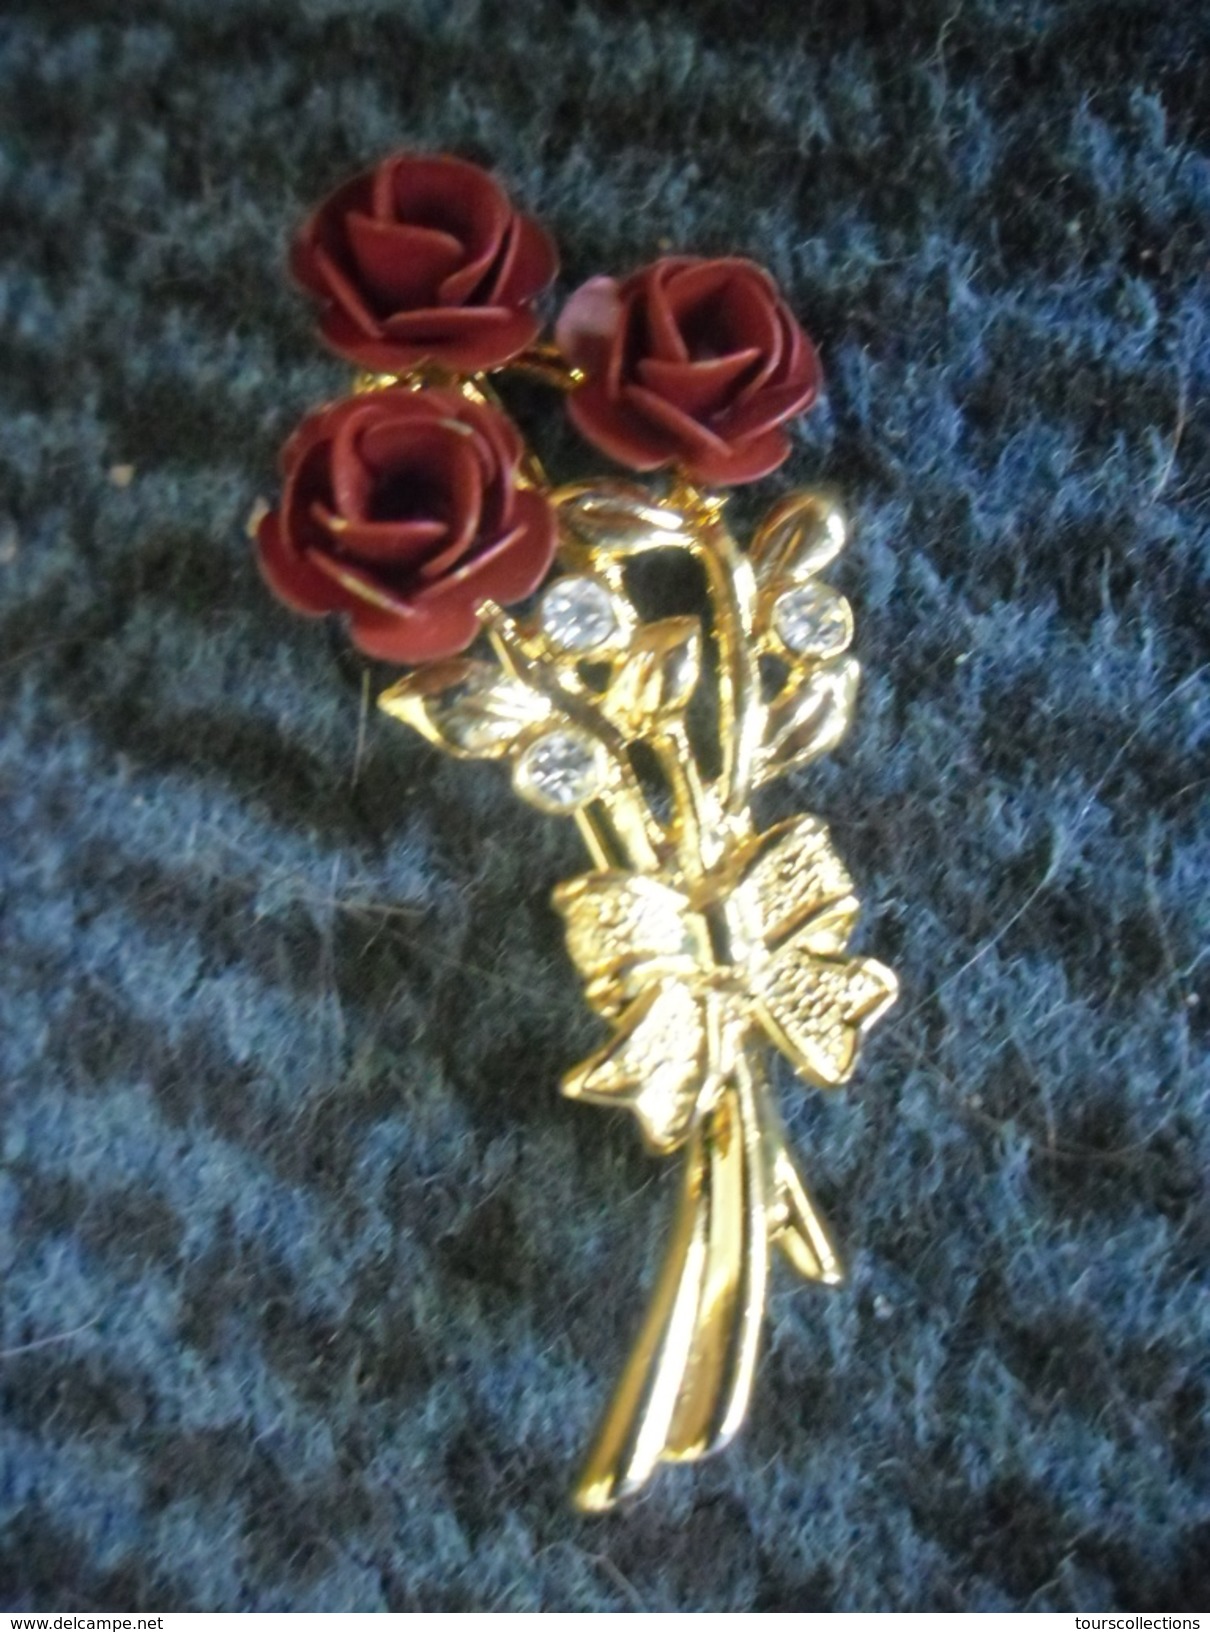 BROCHE FLEURS 3 Roses Rouge 55 Mm - Brooches